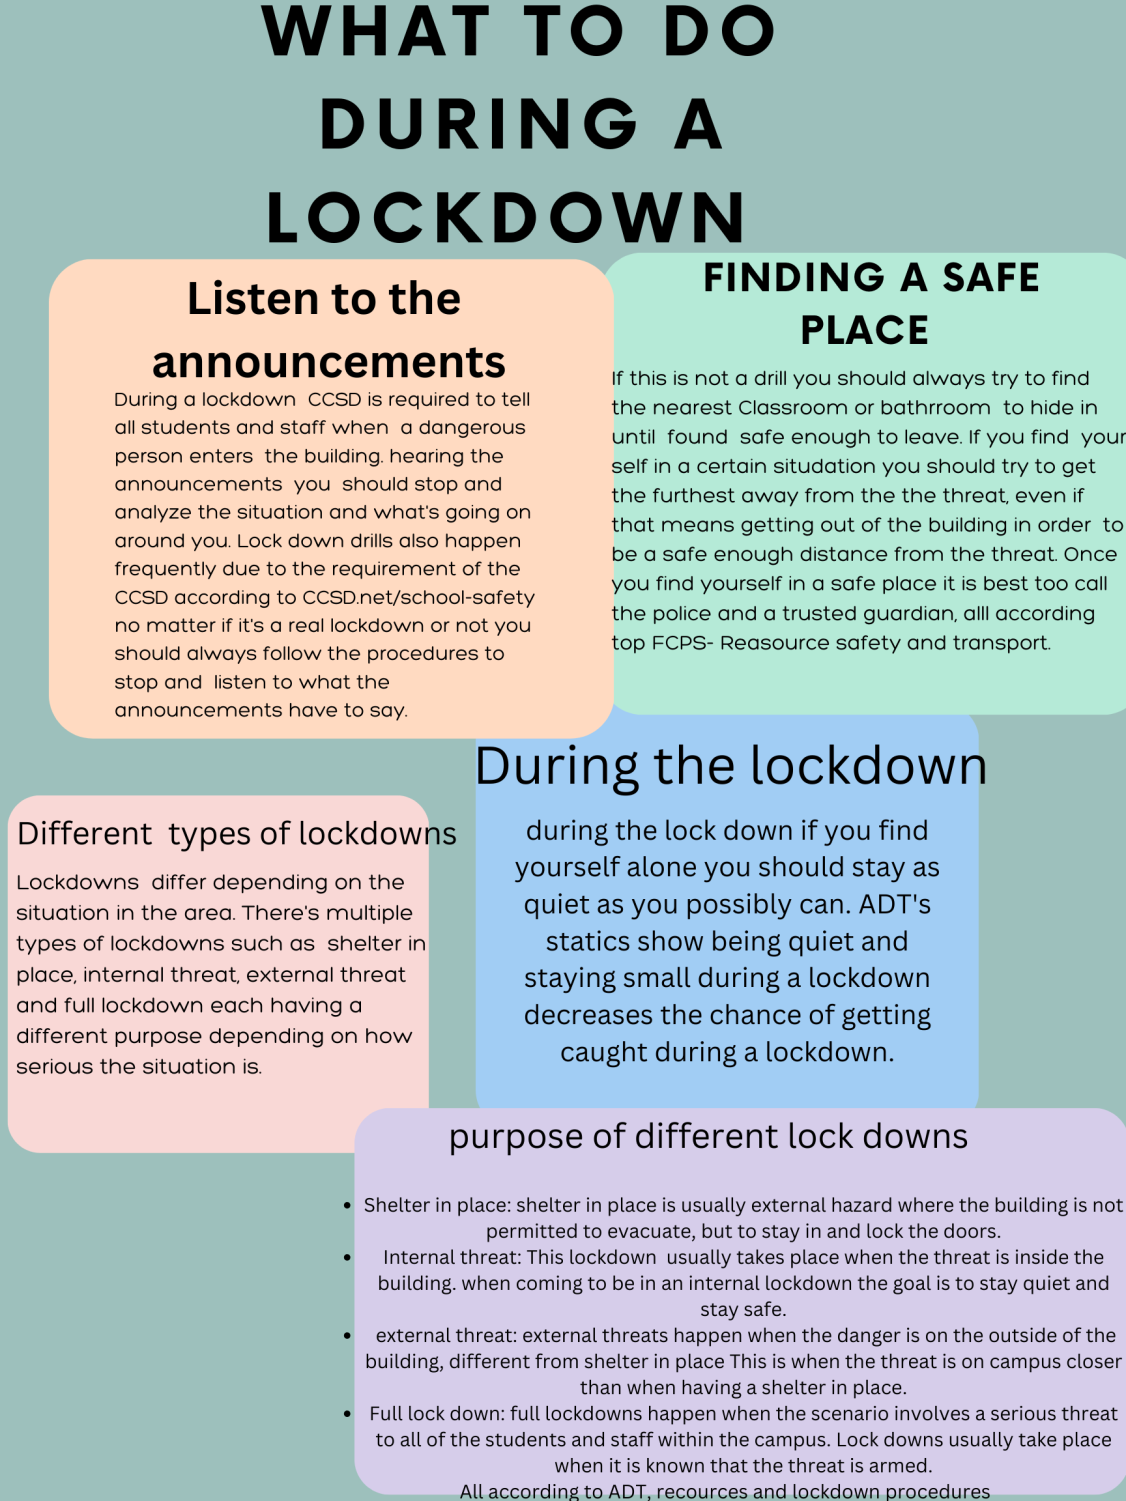 School+Safety+During+a+Lockdown